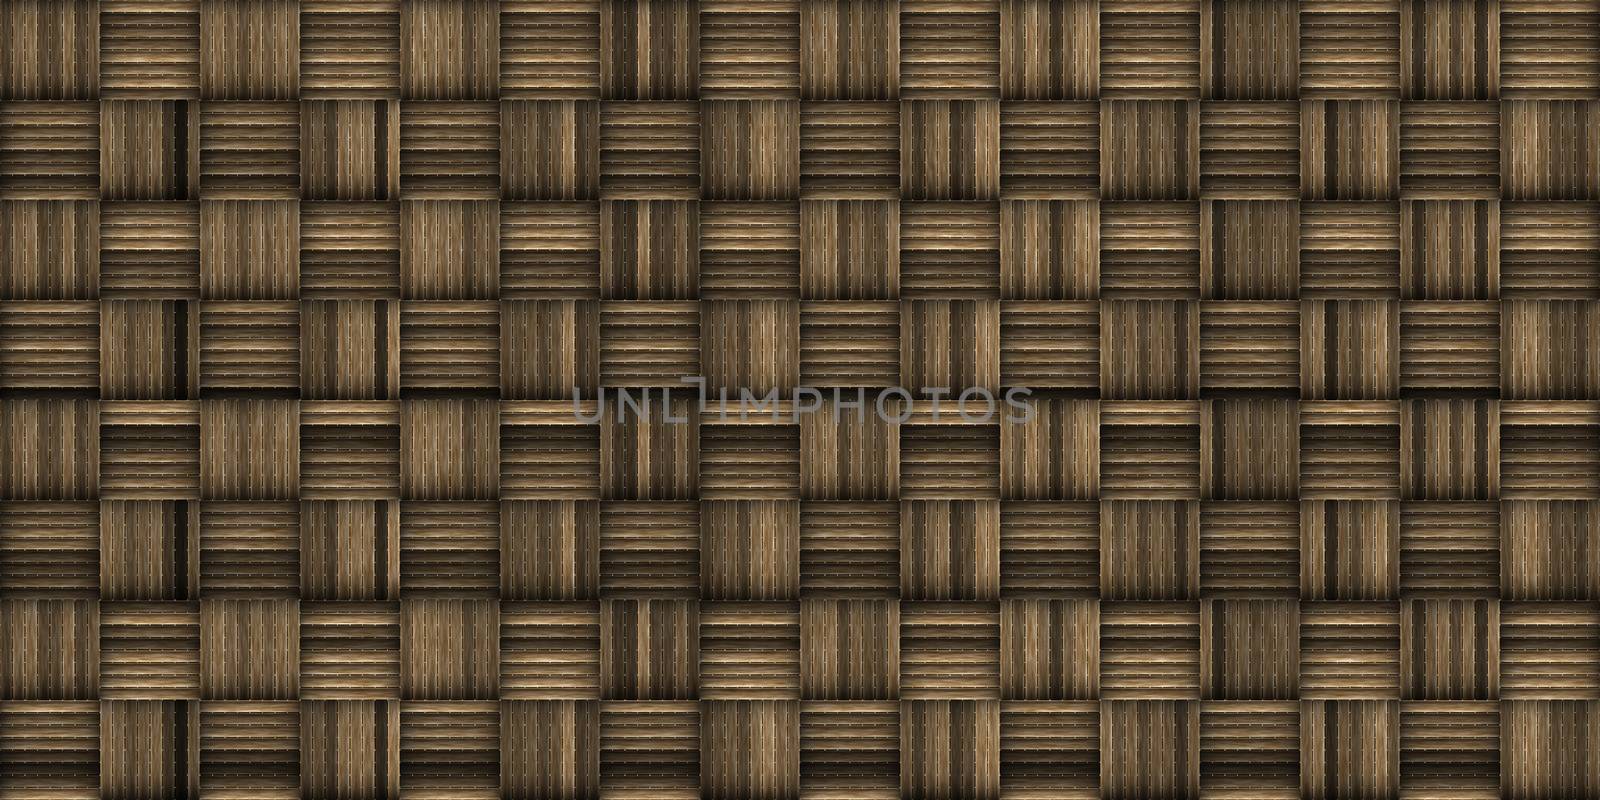 Seamless Basket Weaving Background. Woven Wicker Straw Texture. by sanches812